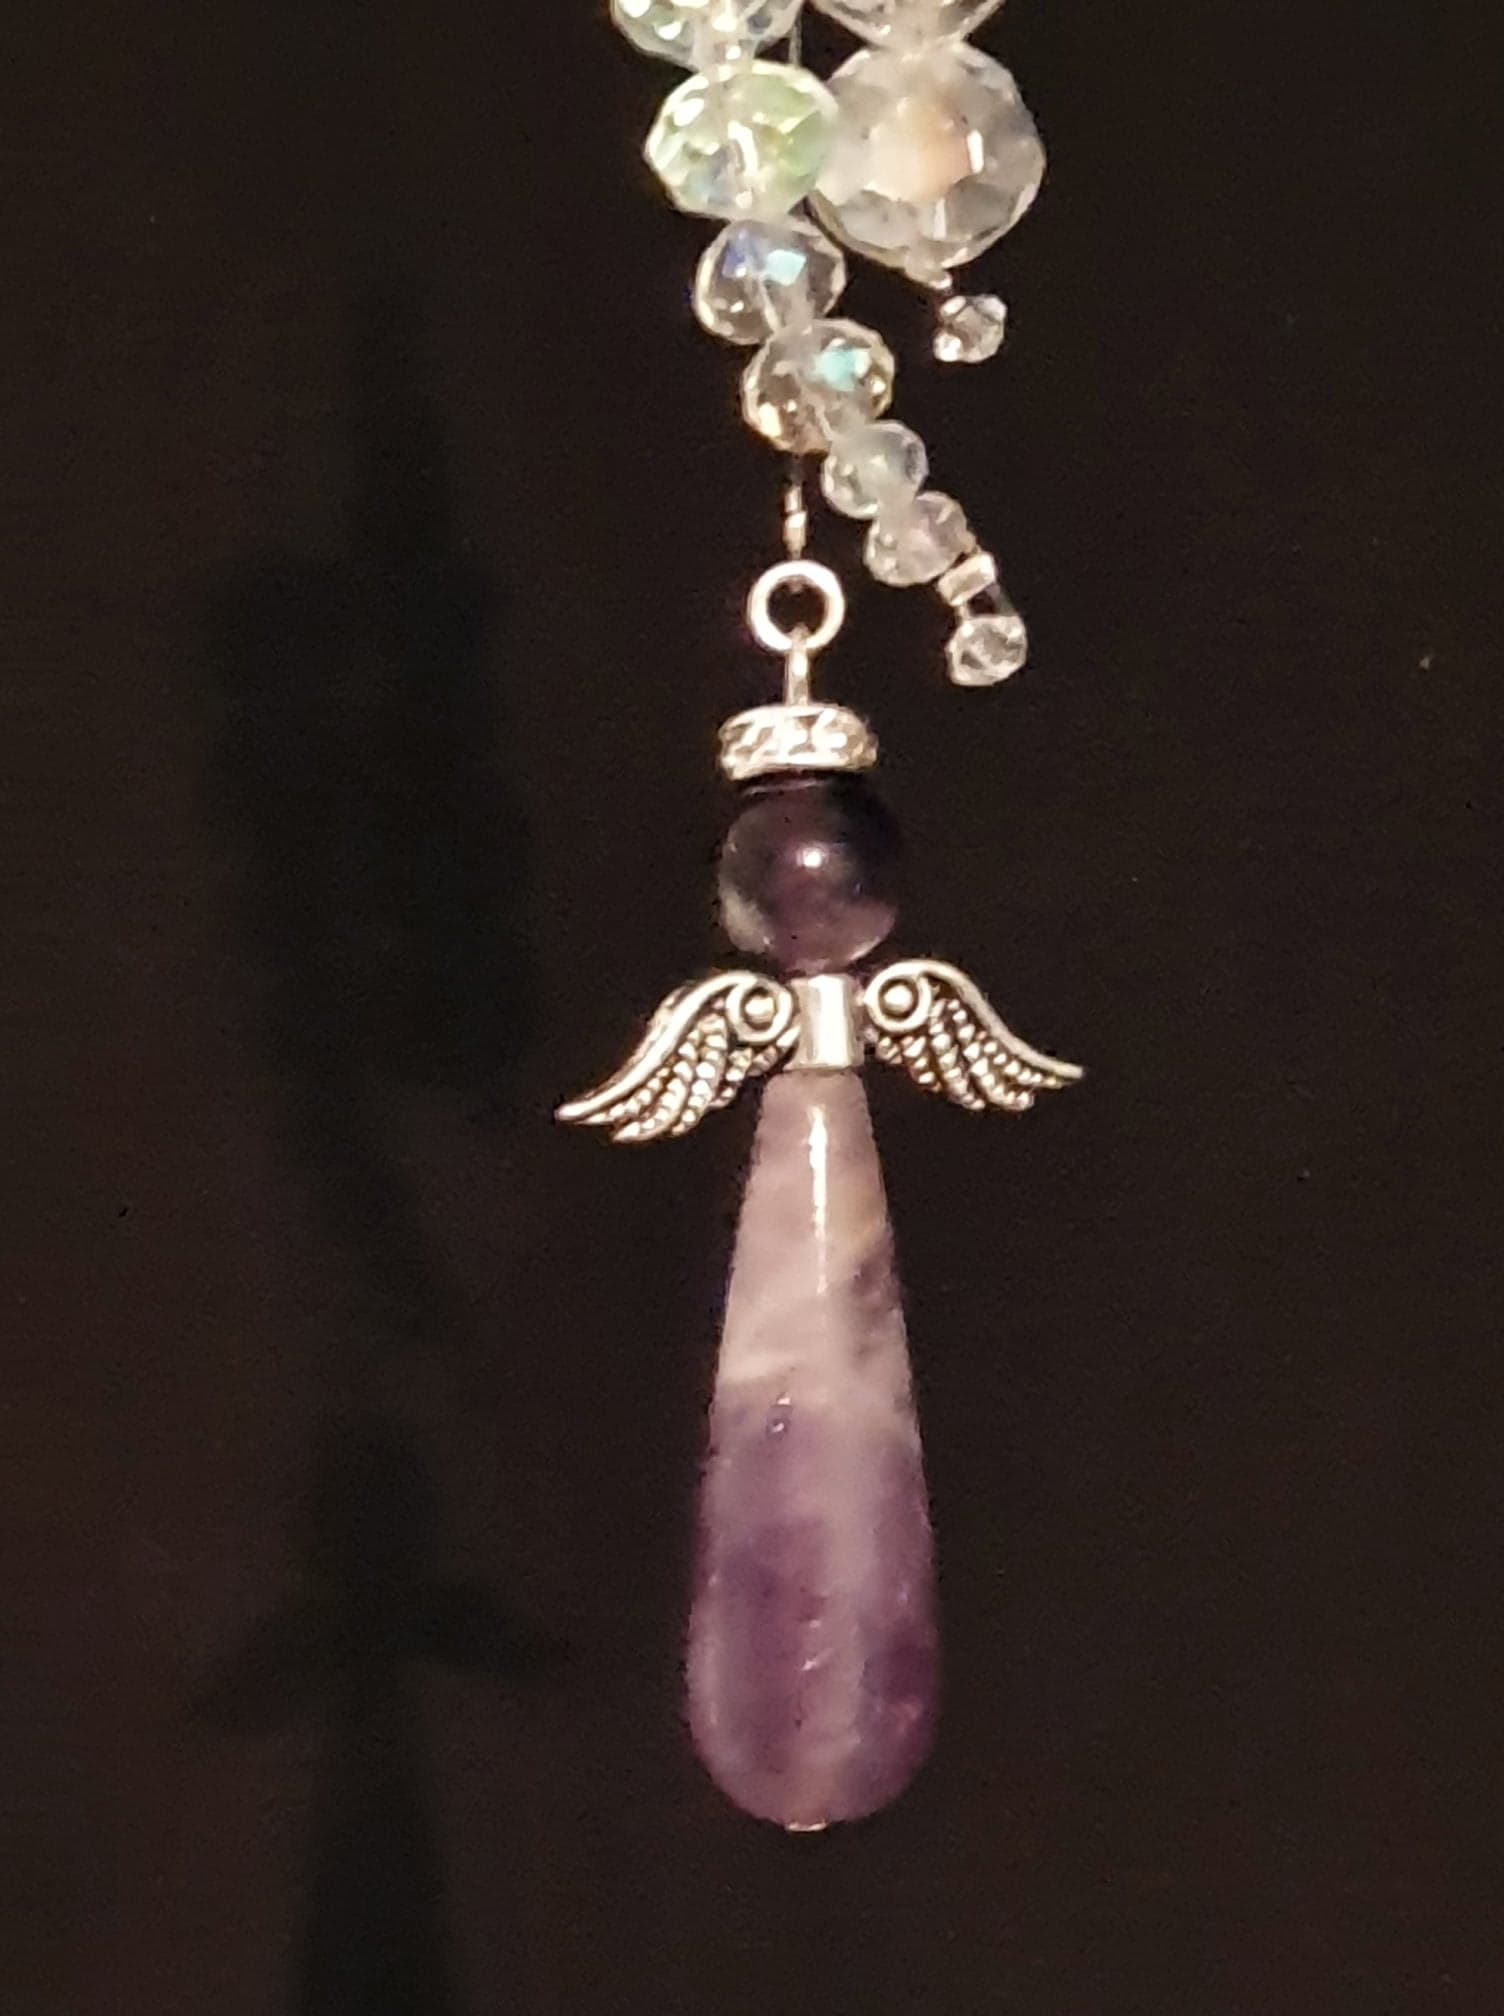 Small cluster window hanger. Amethyst Angel with AB glass crystals window decoration